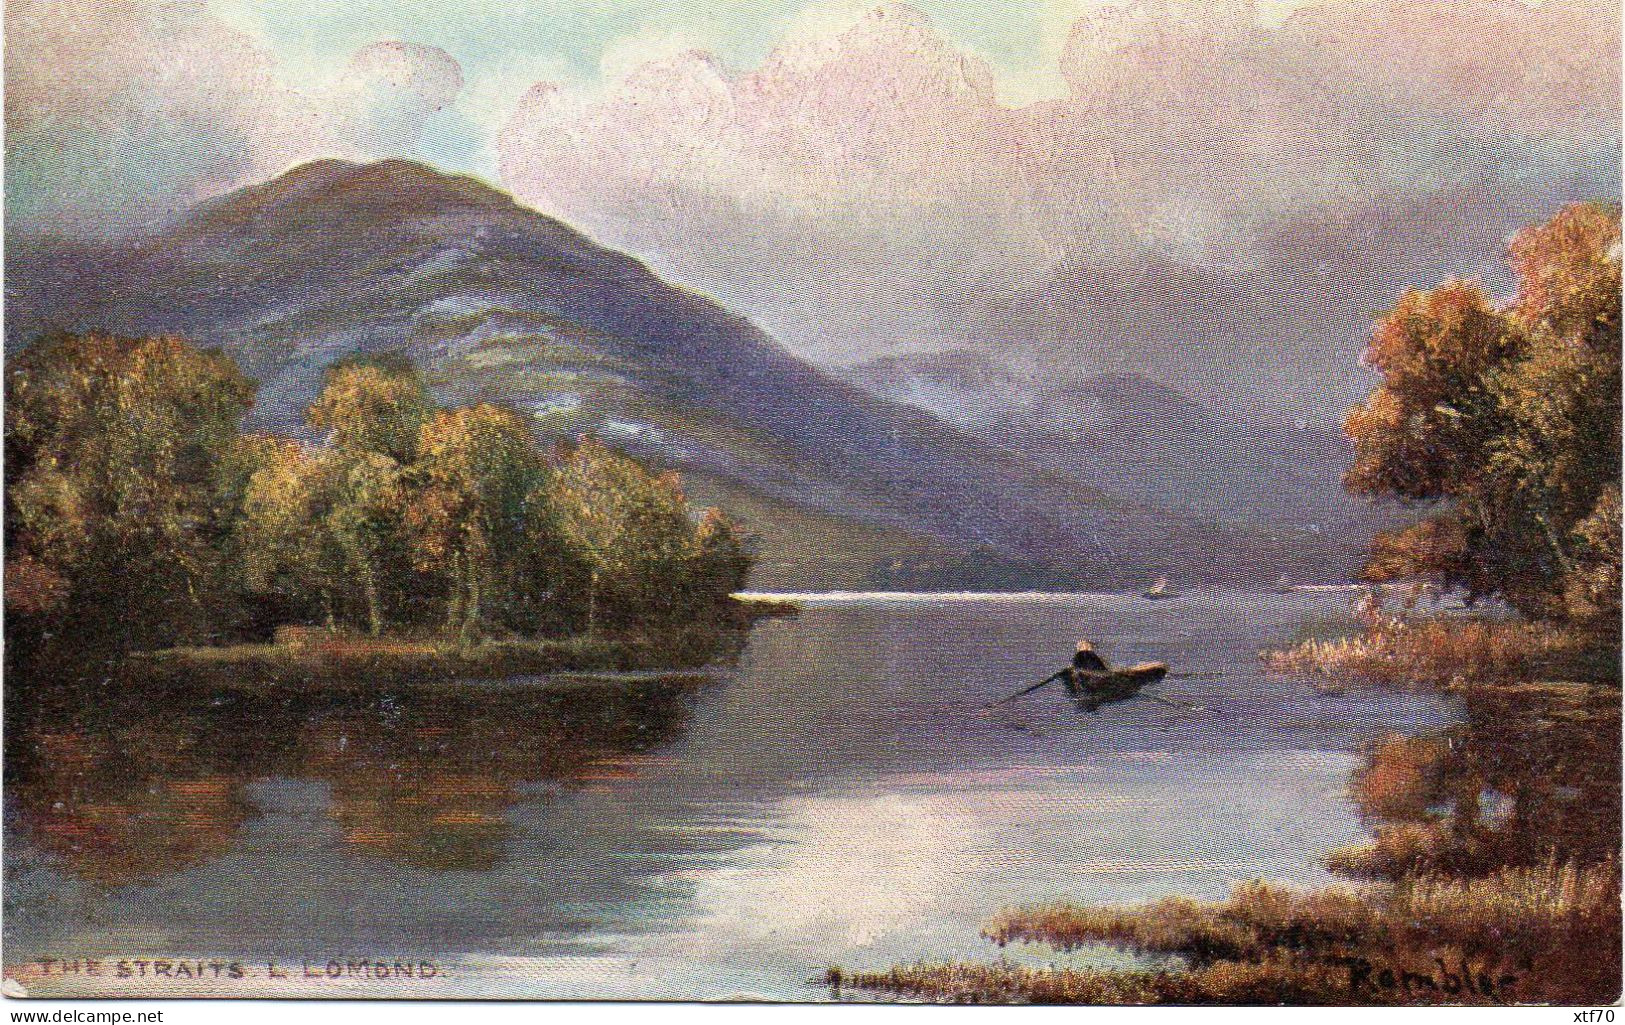 PPC: The Straights, Loch Lomond - Stirlingshire